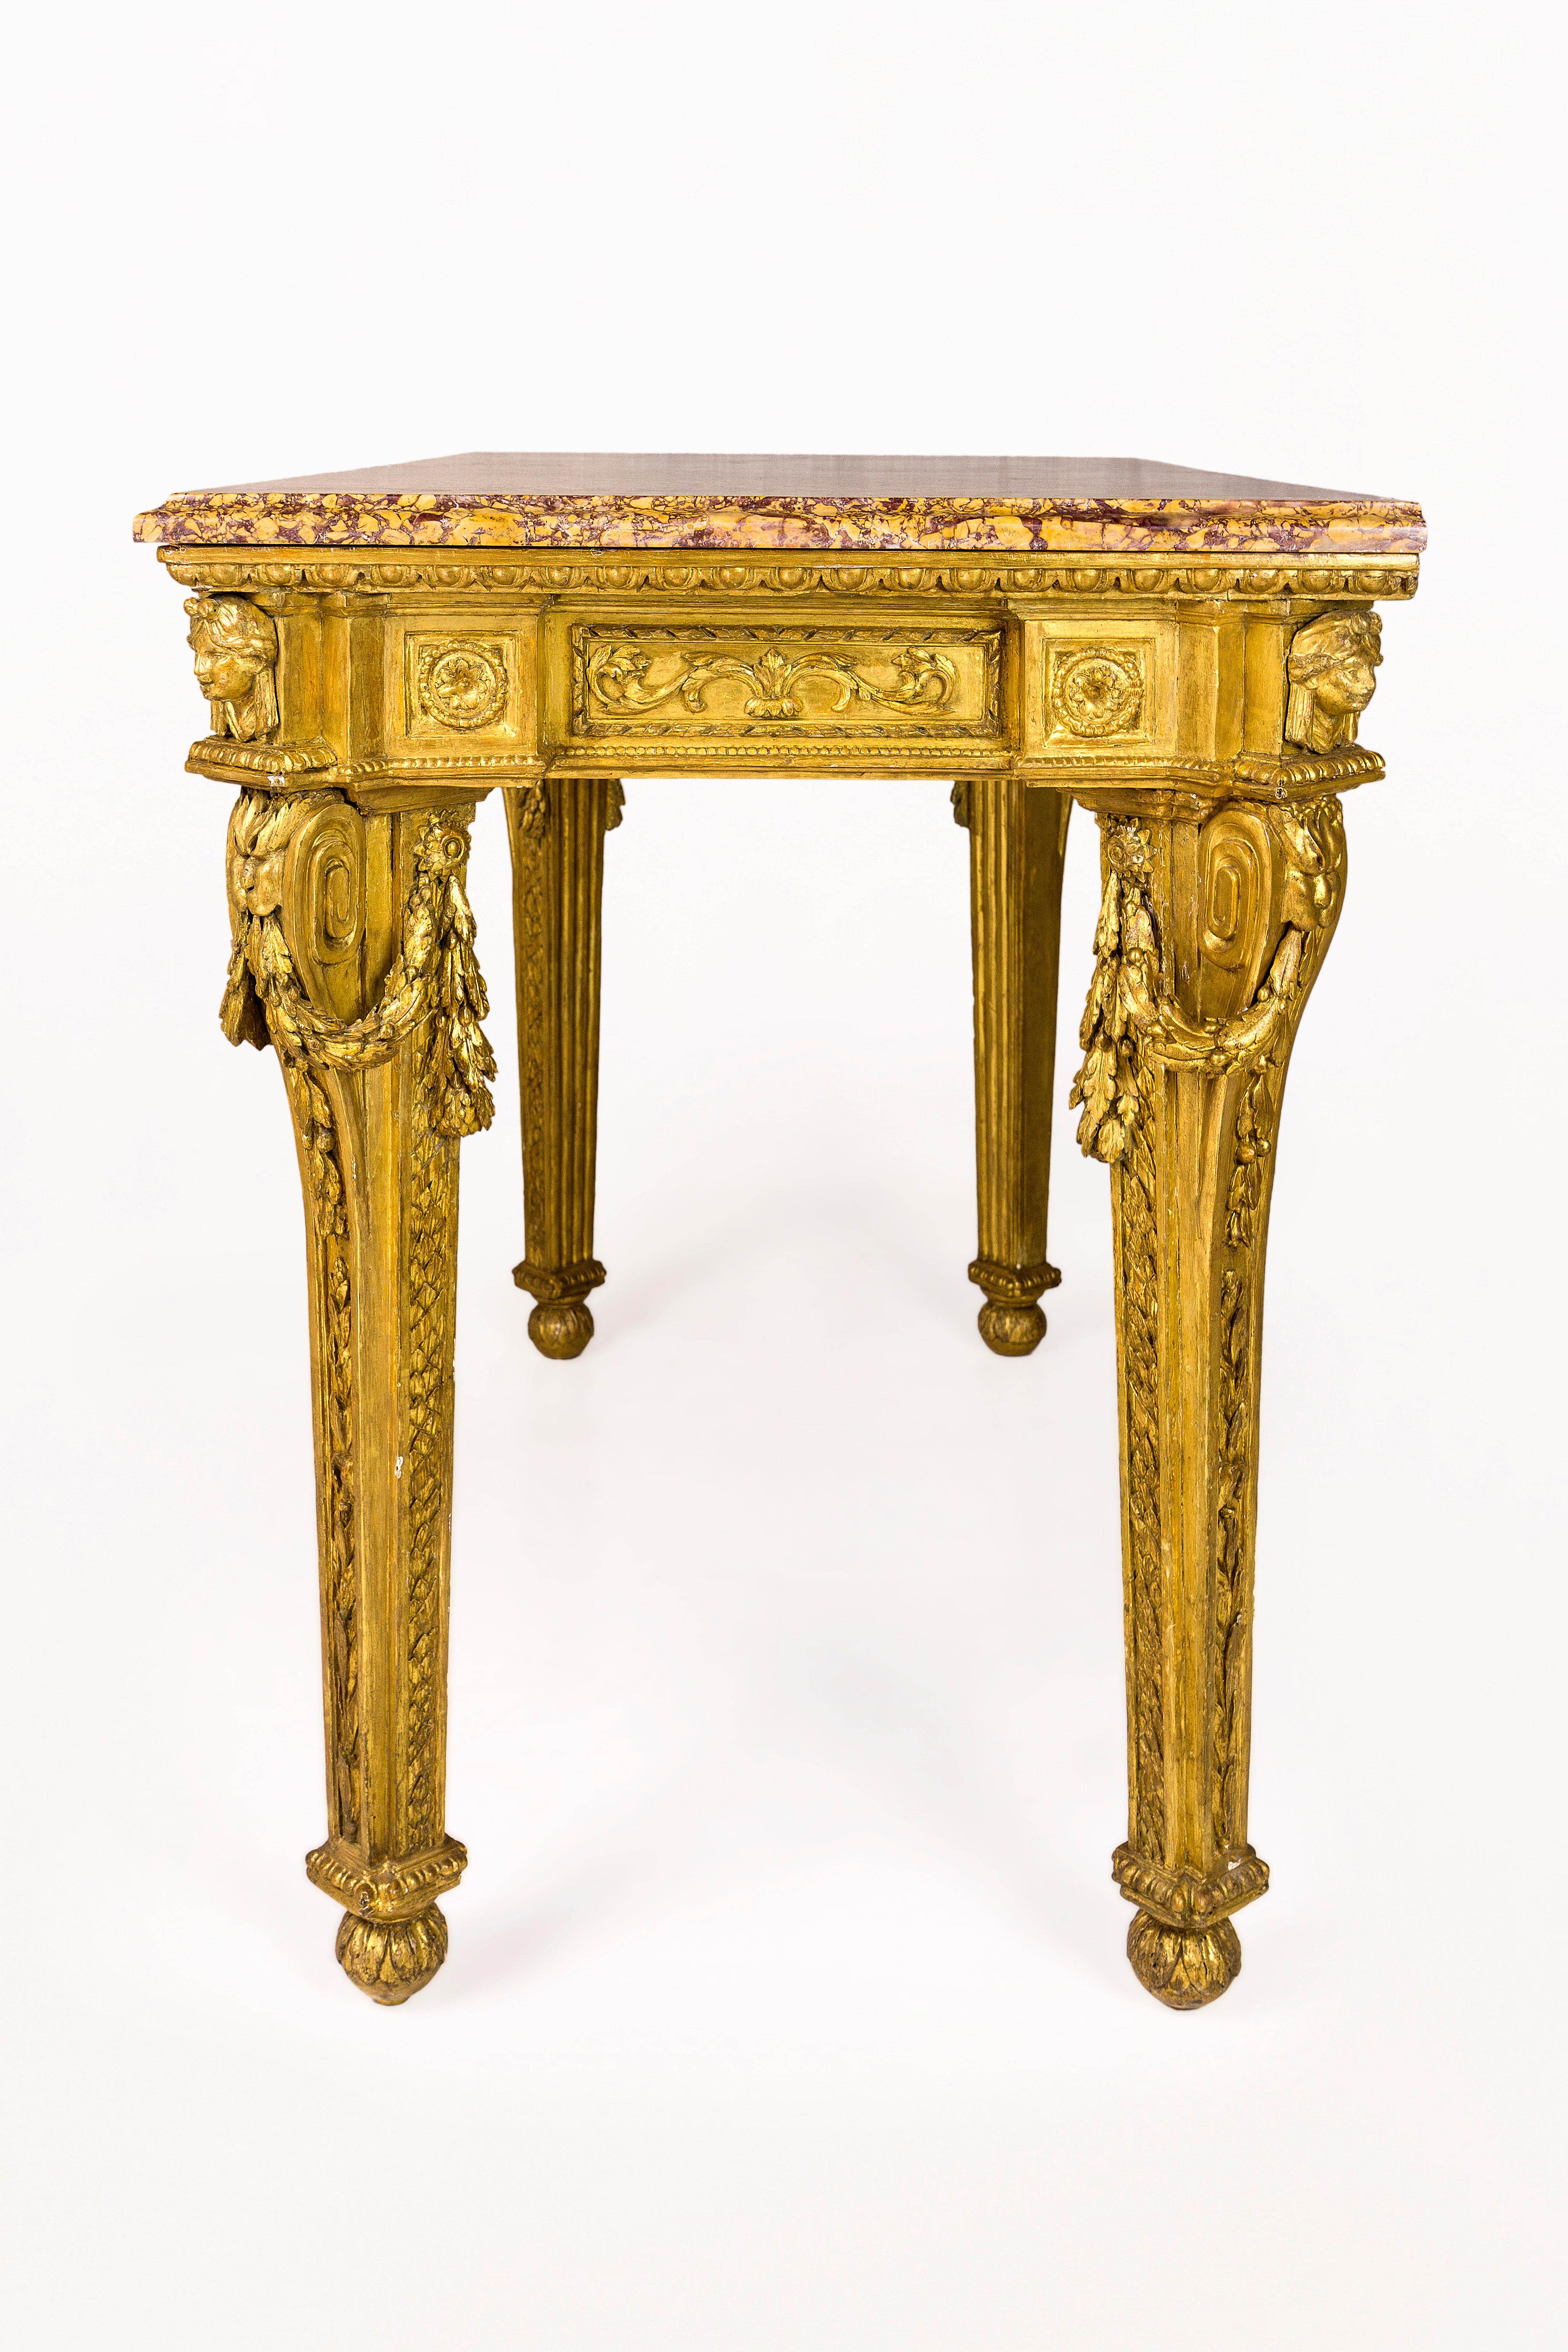 Marble Gilt Wooden Console, 18th Century, Italy